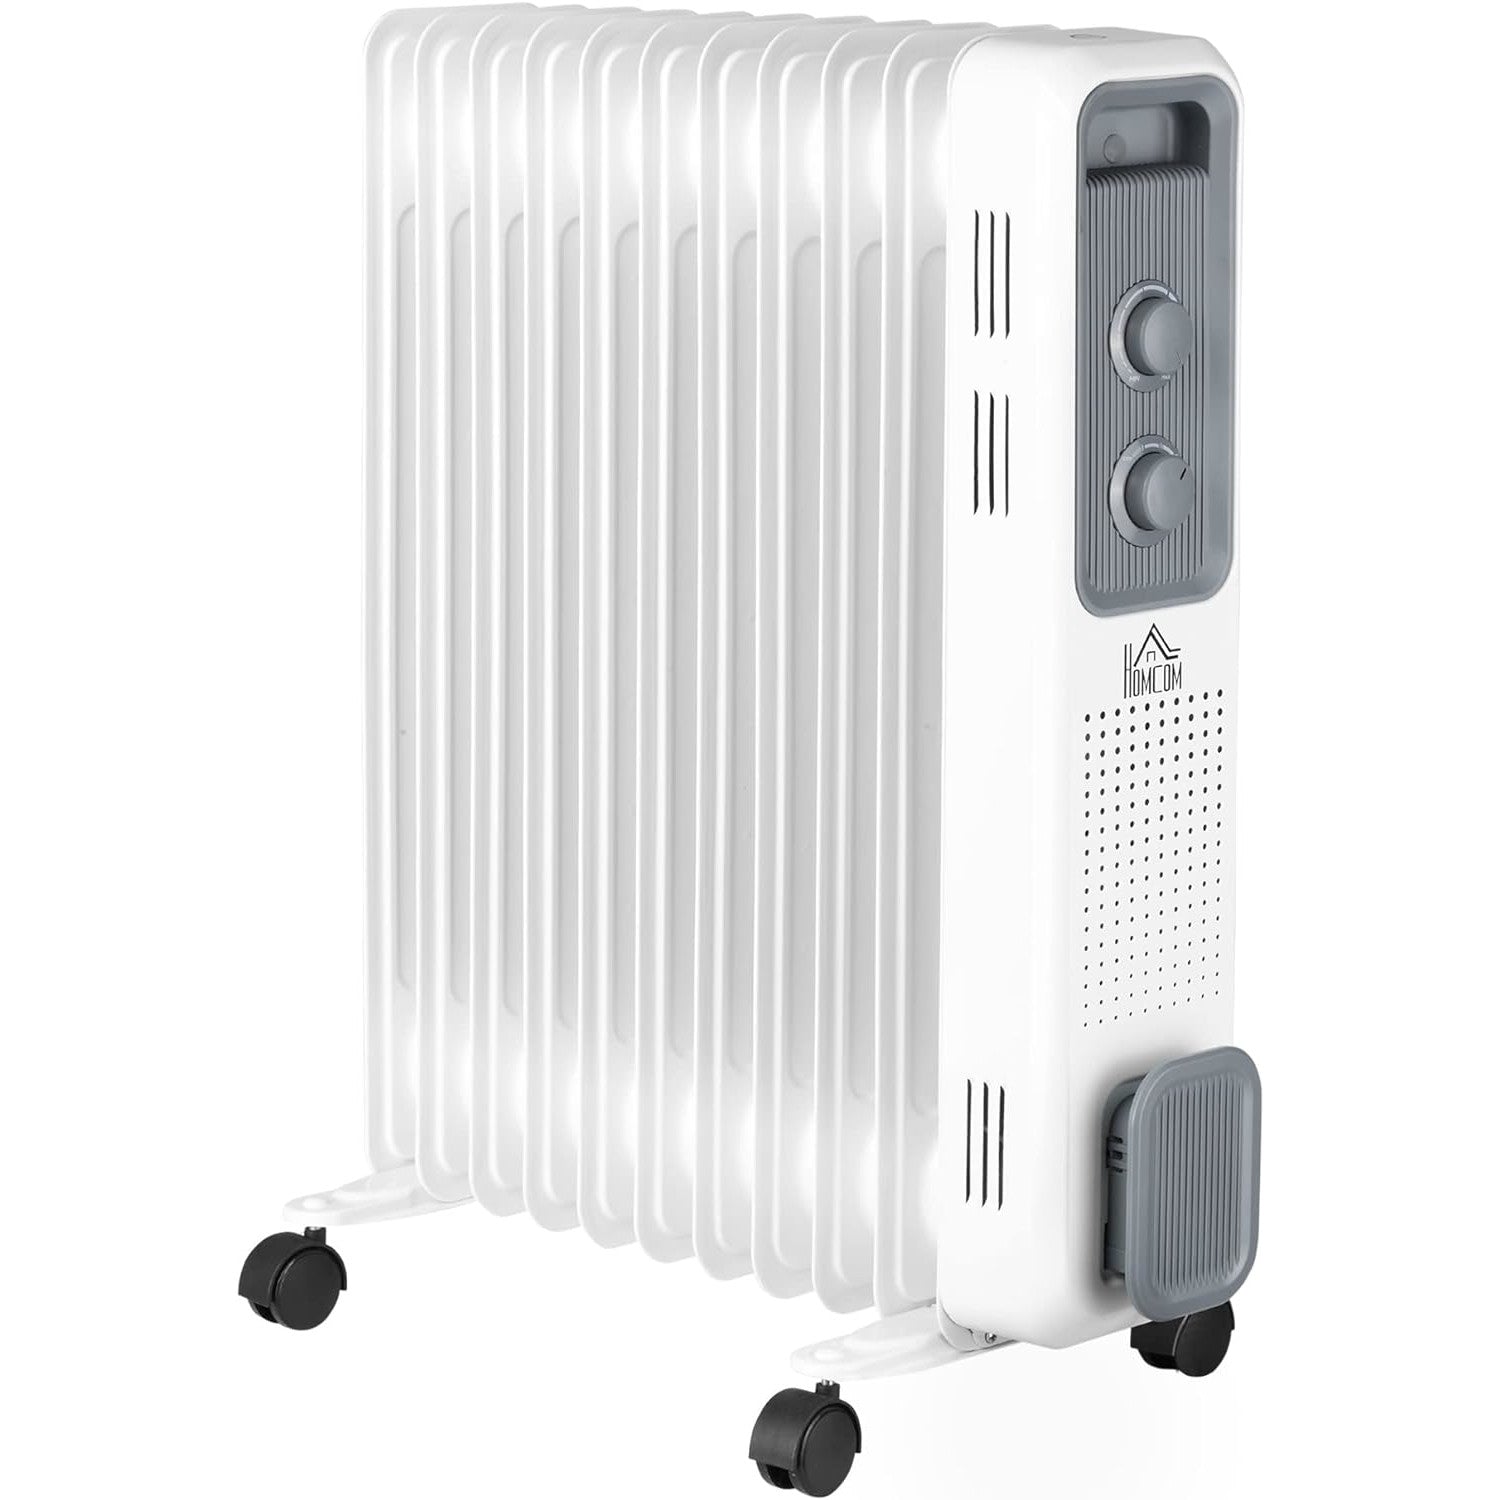 Maplin 11 Fin Portable Oil Filled Radiator with Wheels & 3 Heat Settings - White